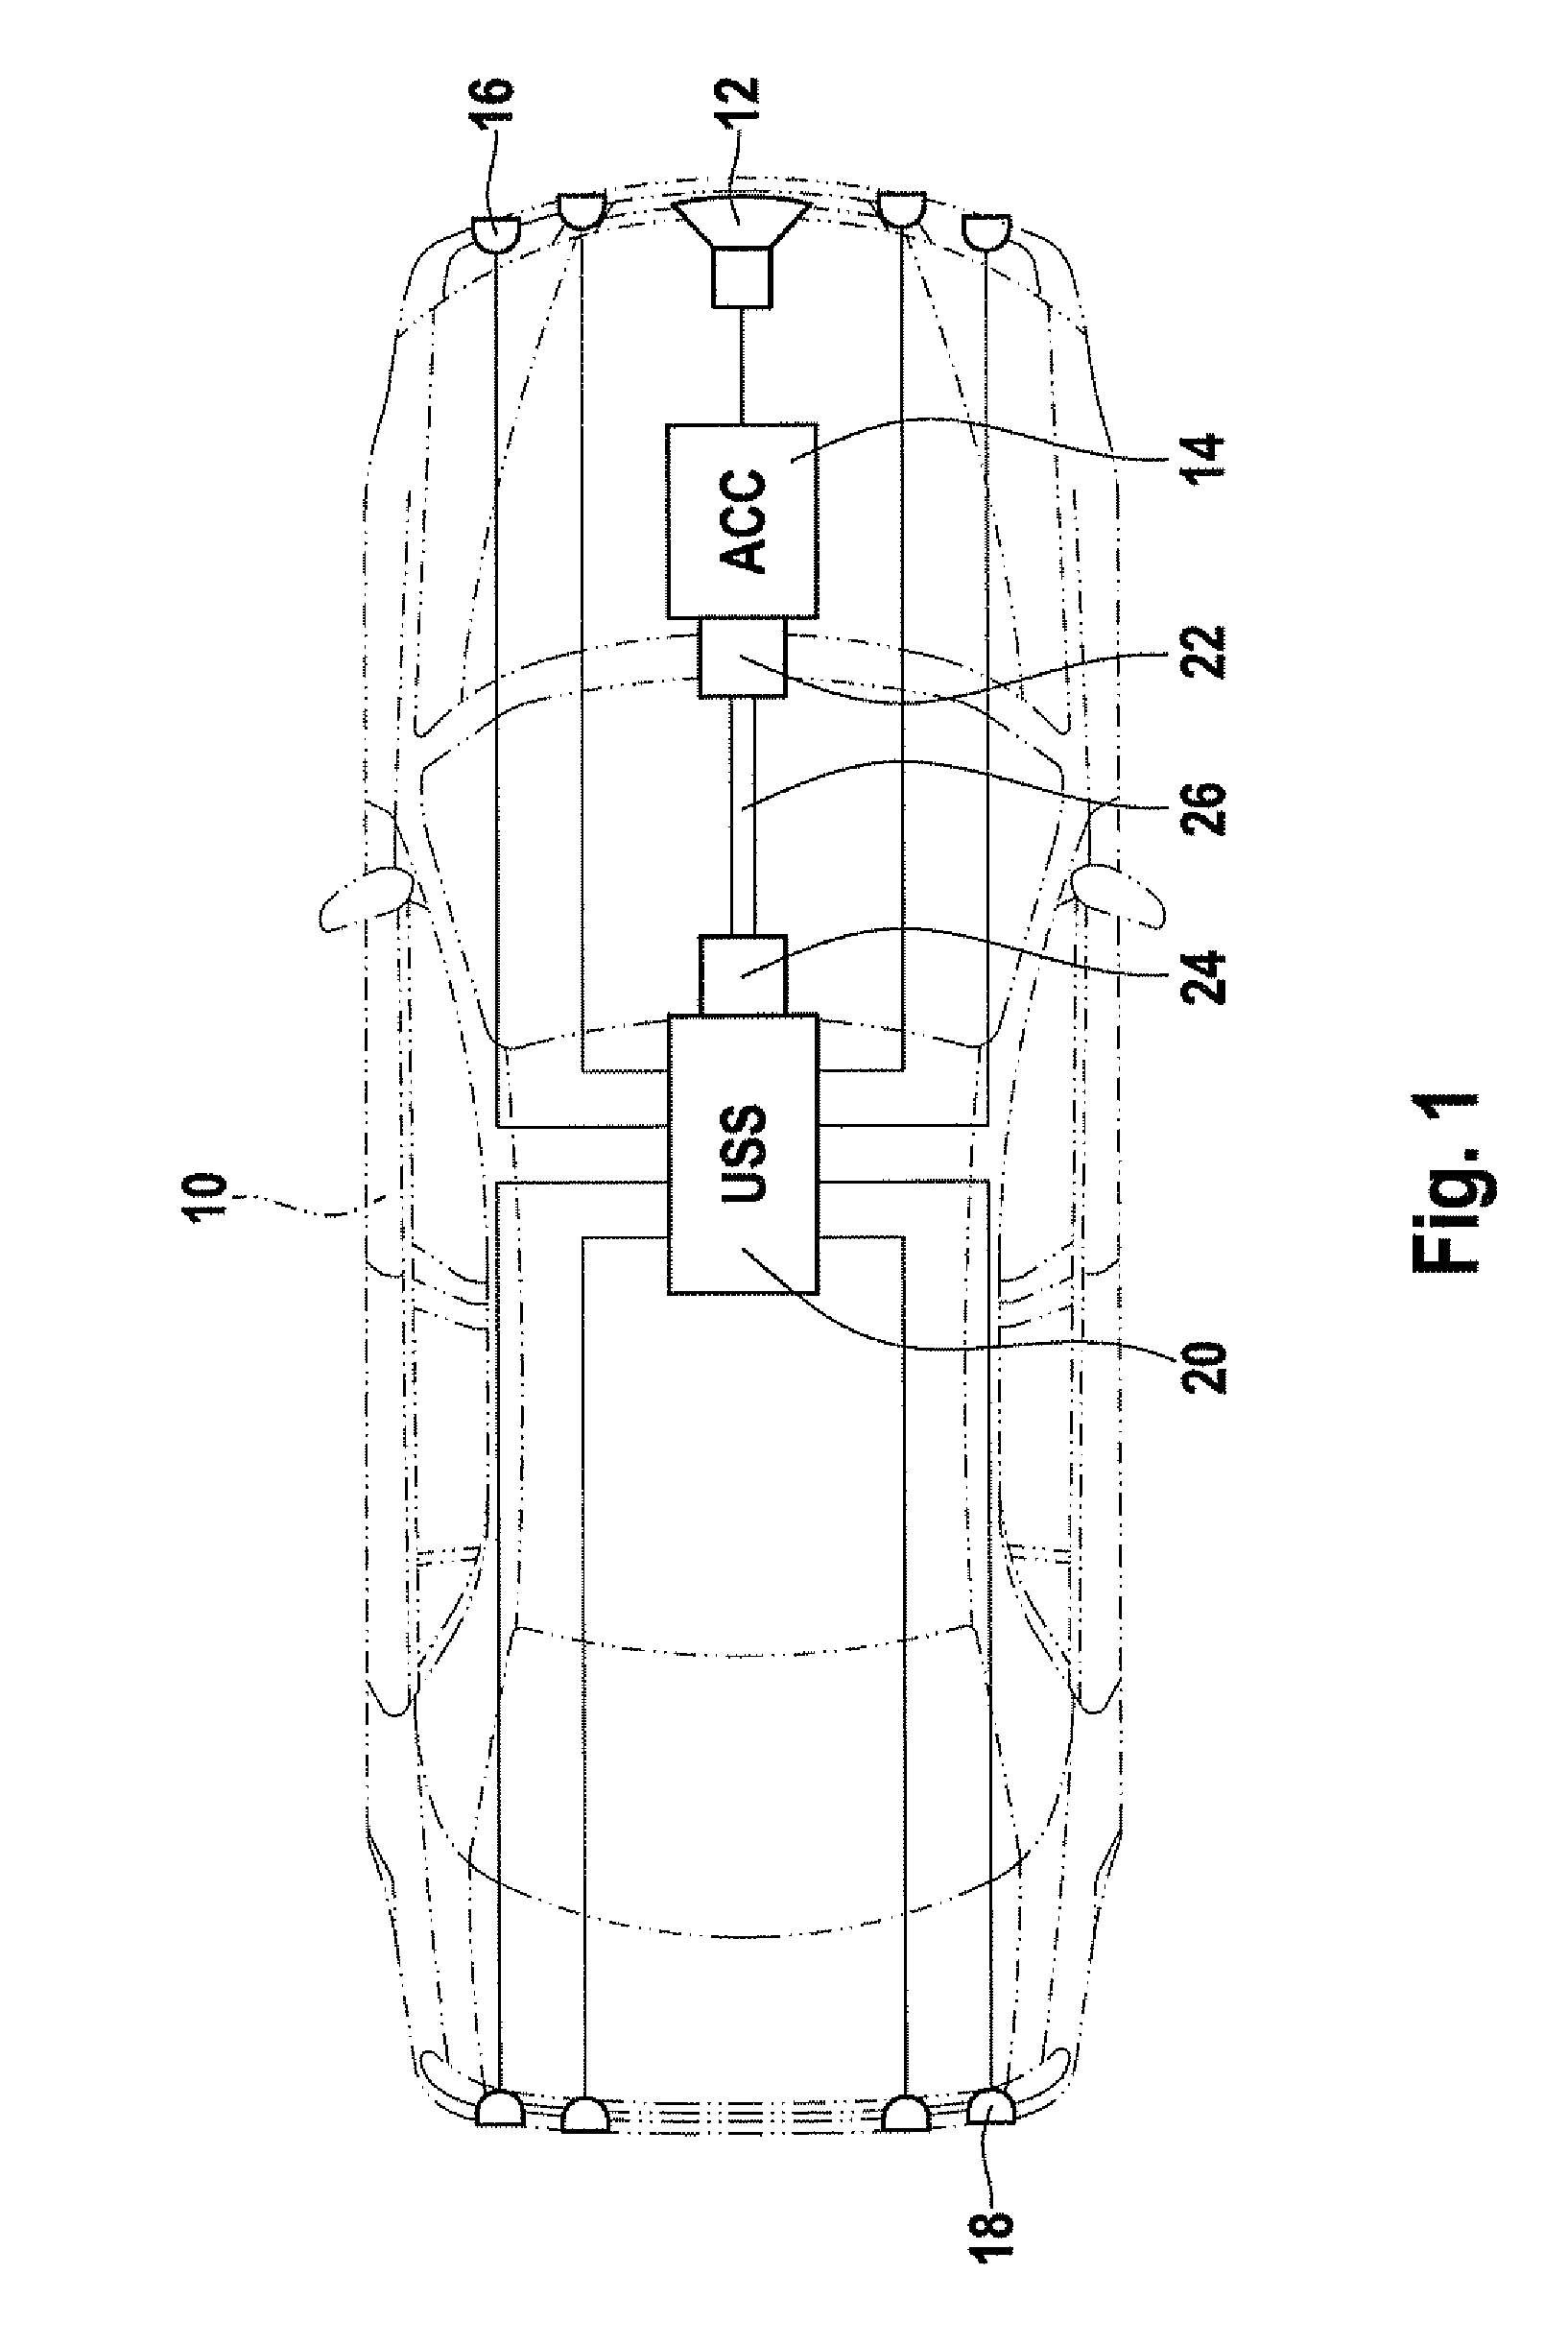 Distance controller with automatic stop function